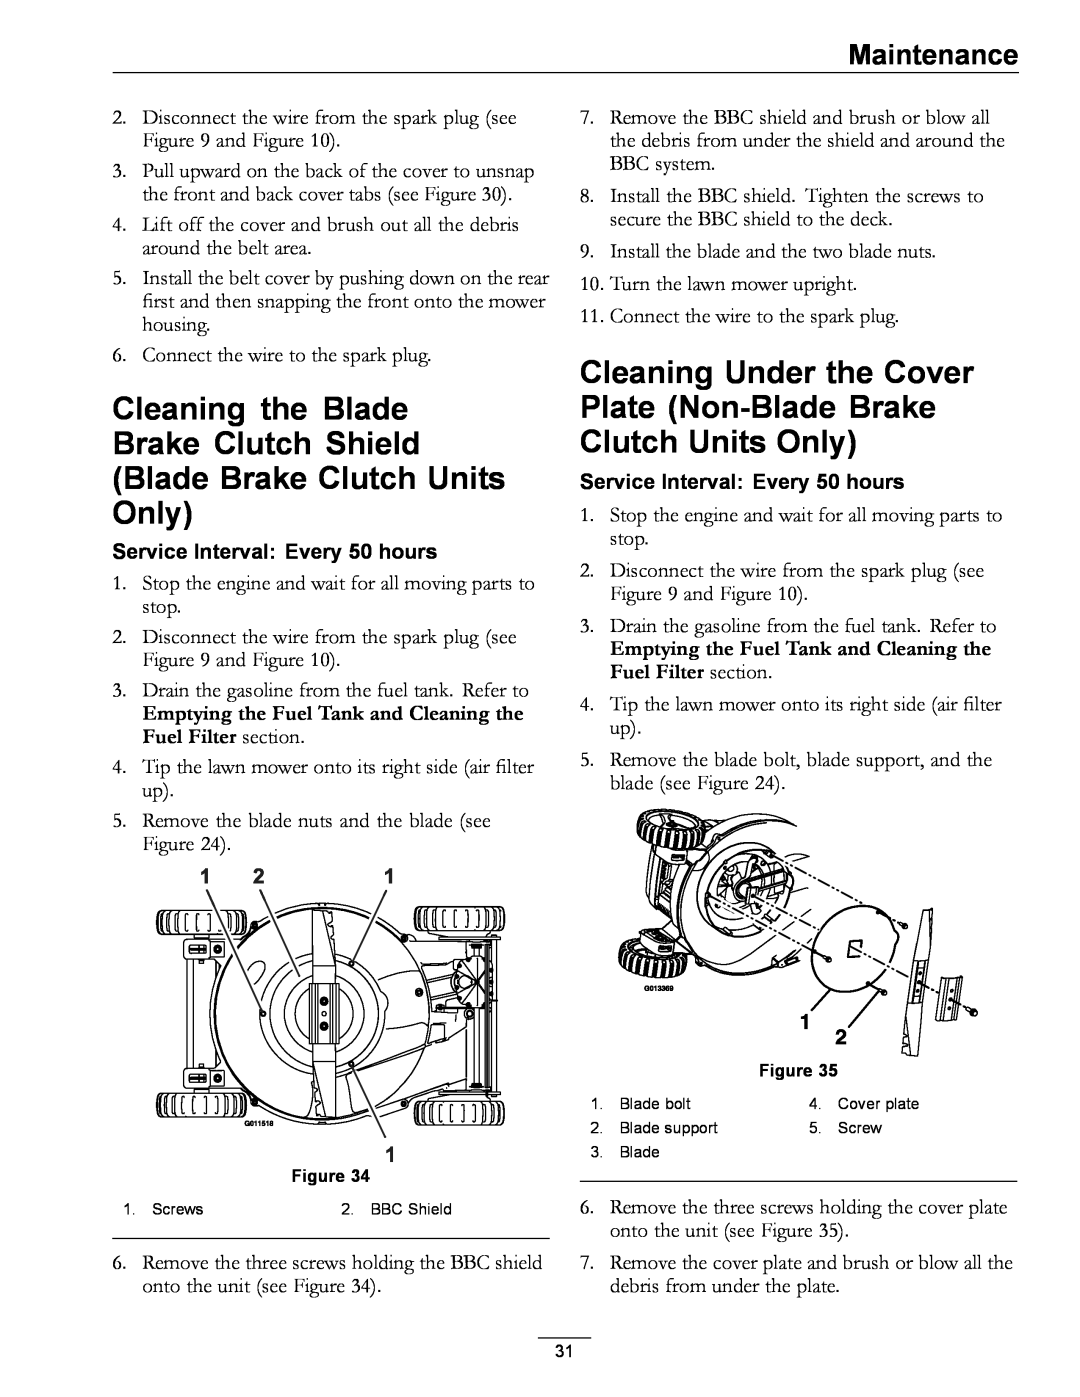 Exmark COMMERCIAL 21 manual Cleaning the Blade Brake Clutch Shield Blade Brake Clutch Units Only, Maintenance 